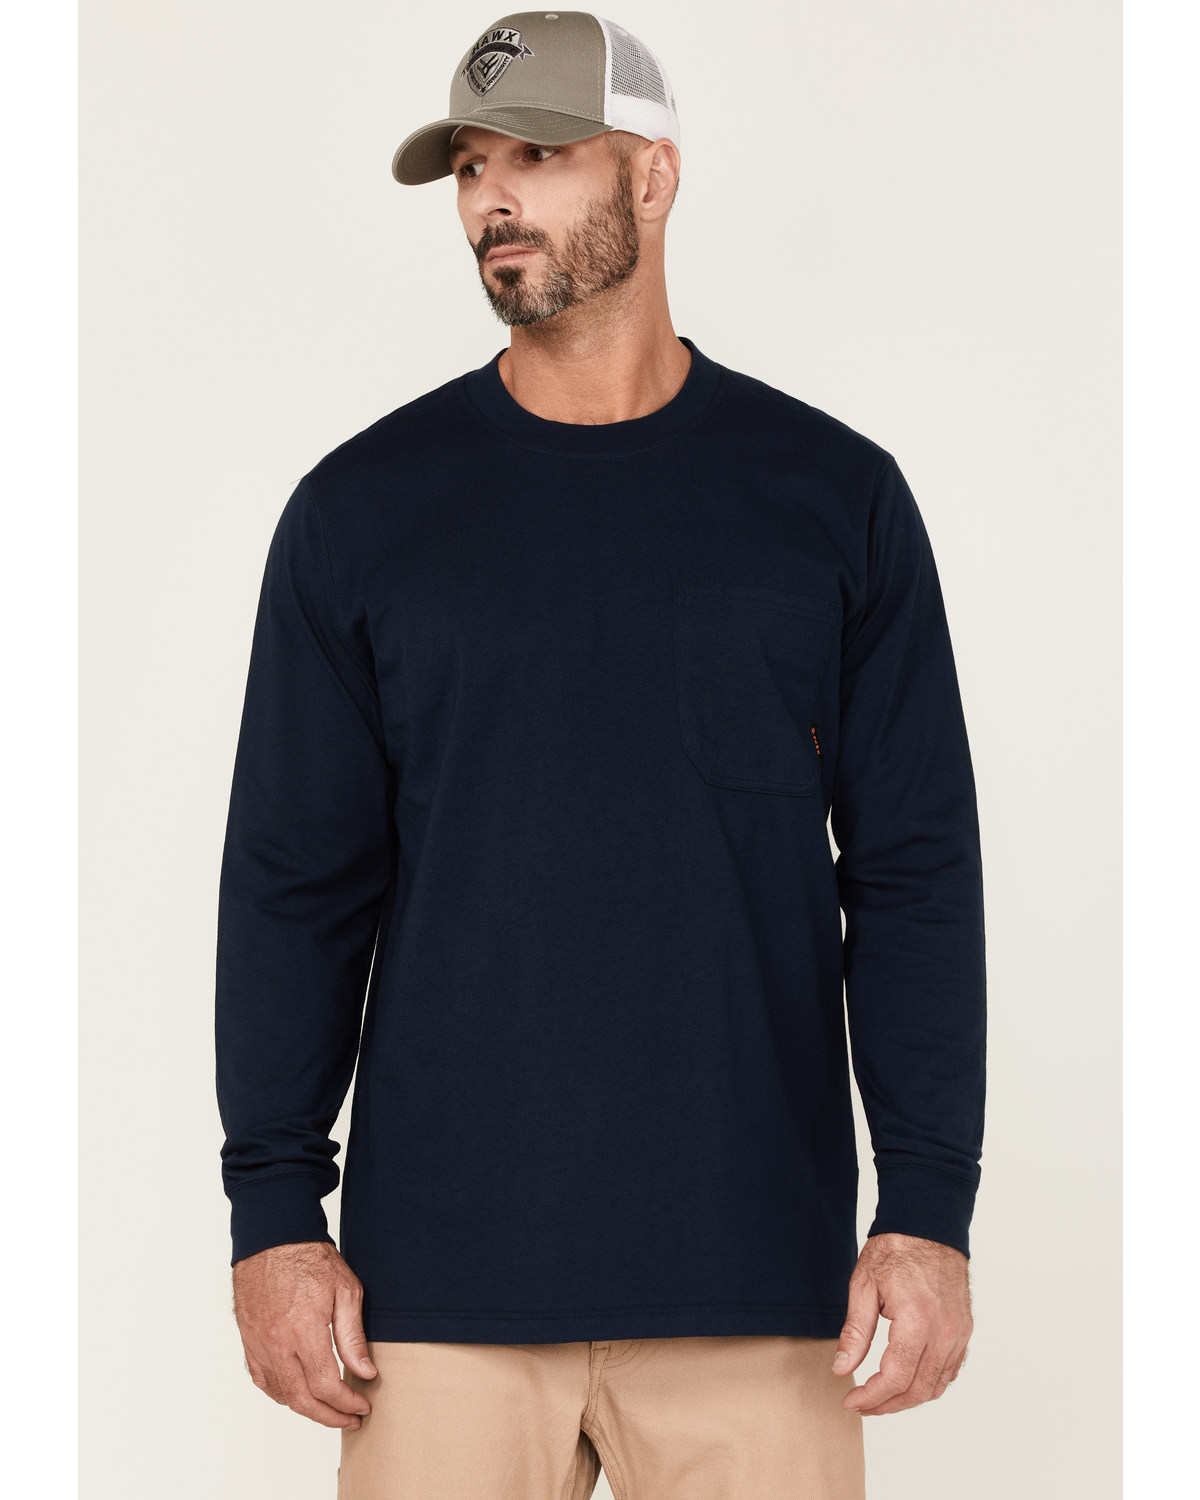 Hawx Men's Solid Navy Forge Long Sleeve Work Pocket T-Shirt